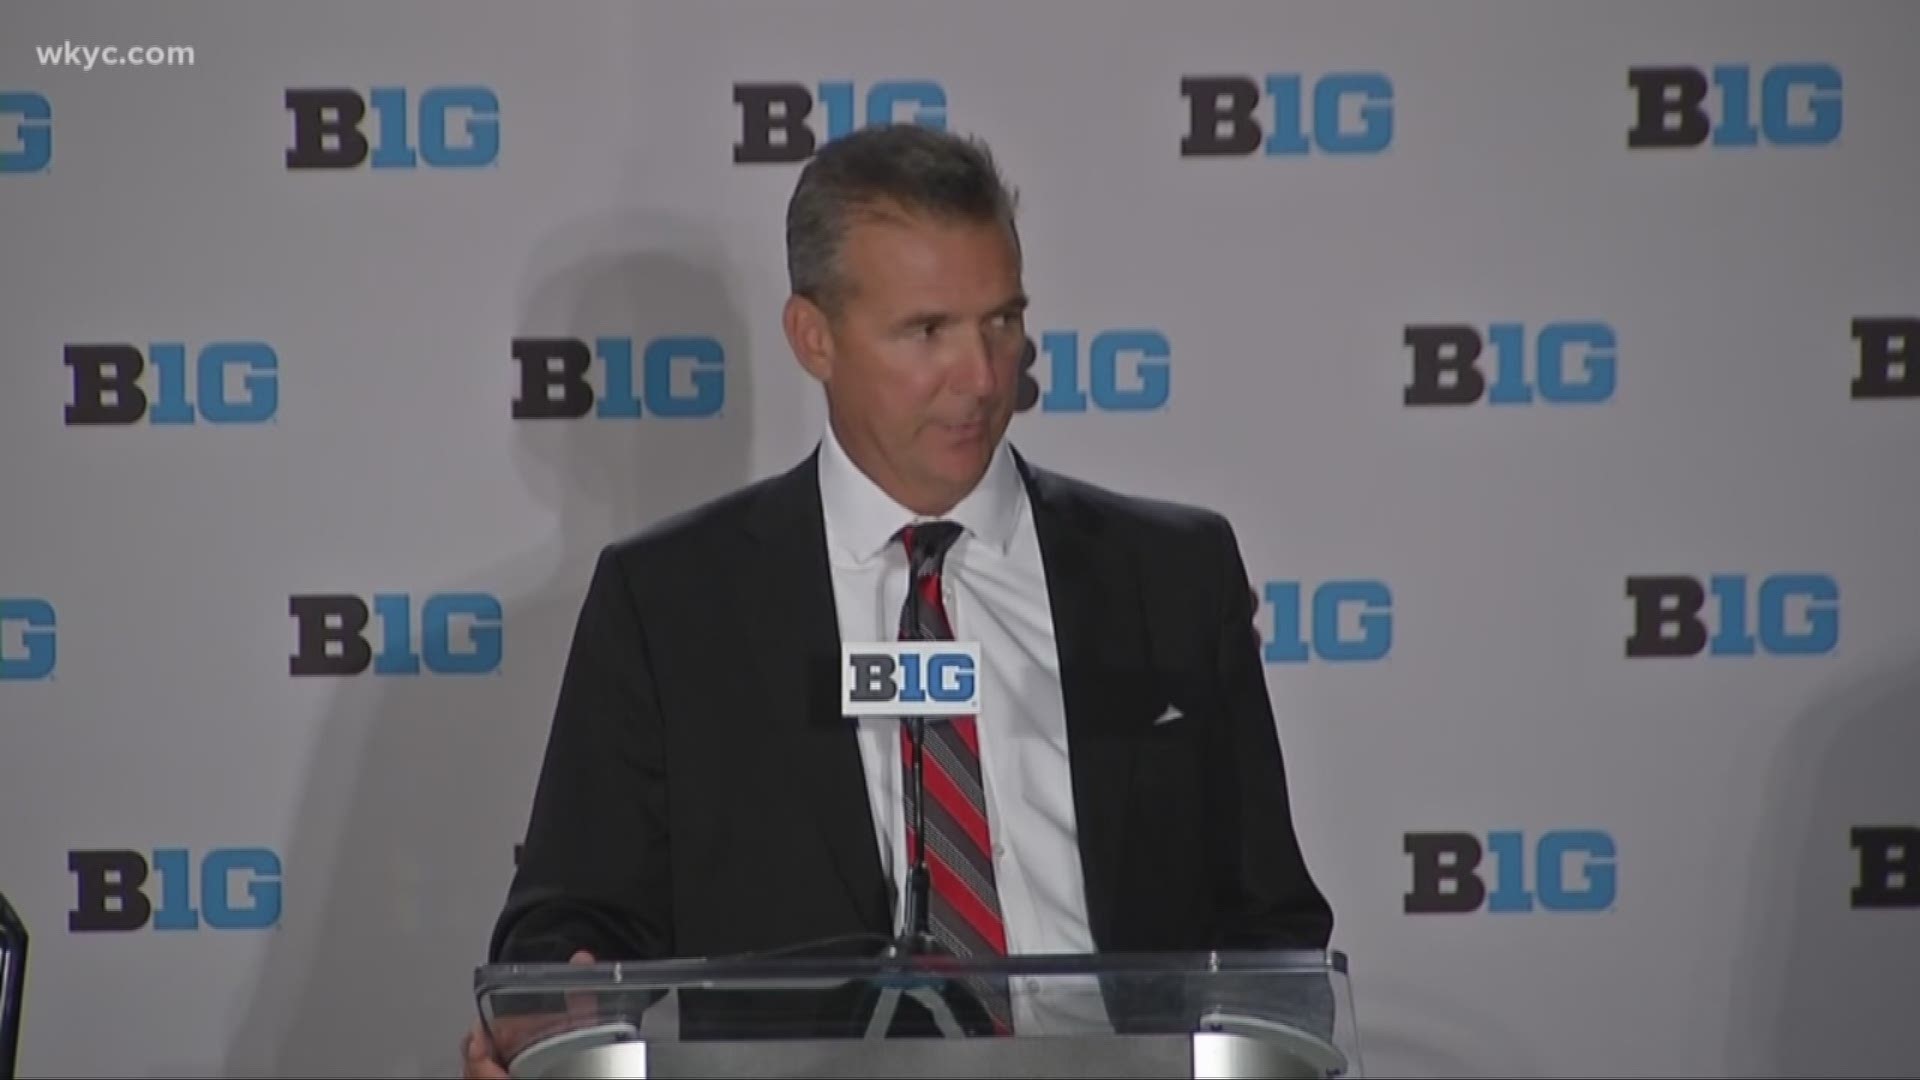 Urban Meyer has been benched: How Buckeyes are reacting